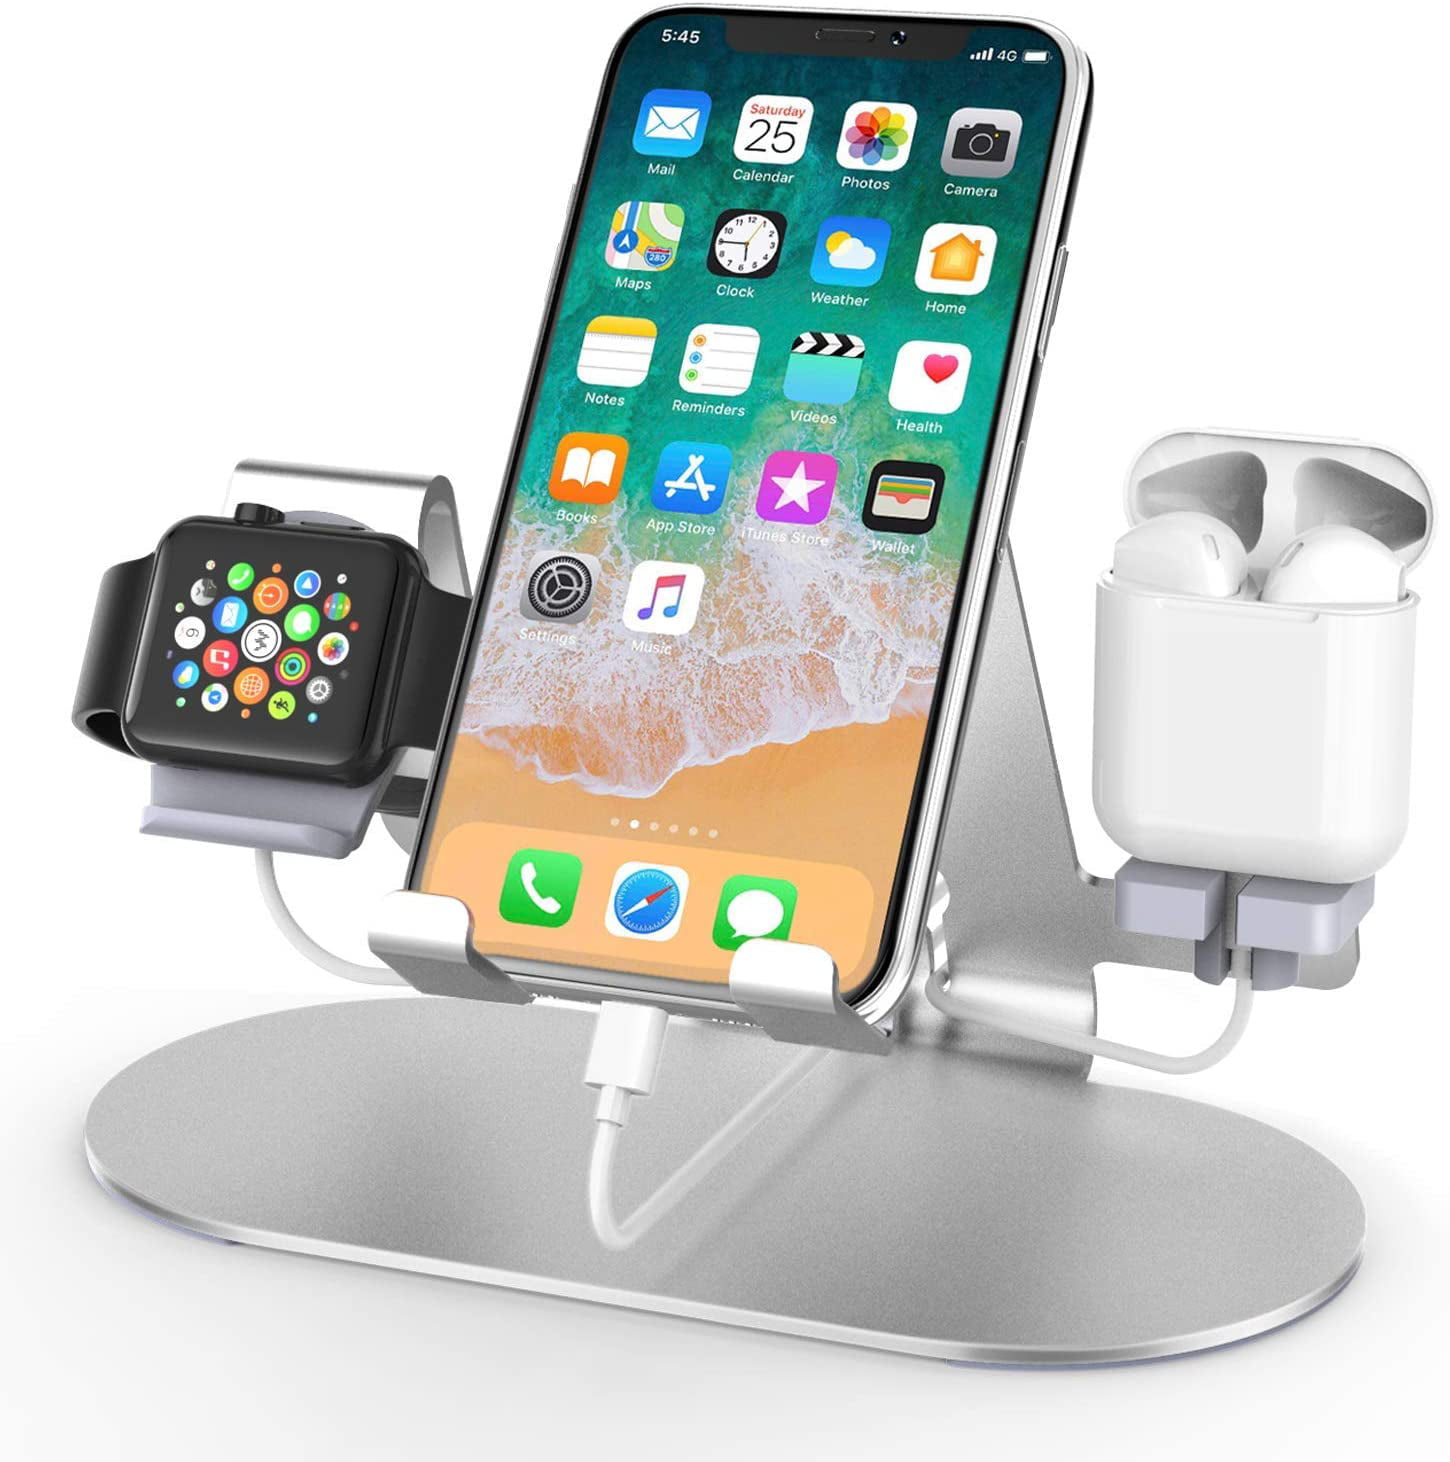 3 in 1 Aluminum Charging Station for Watch Charger Stand Dock for iWatch Series 4/3/2/1,iPad,AirPods and iPhone Xs/X Max/XR/X/8/8Plus/7/7 Plus /6S /6S Plus/ - Walmart.com